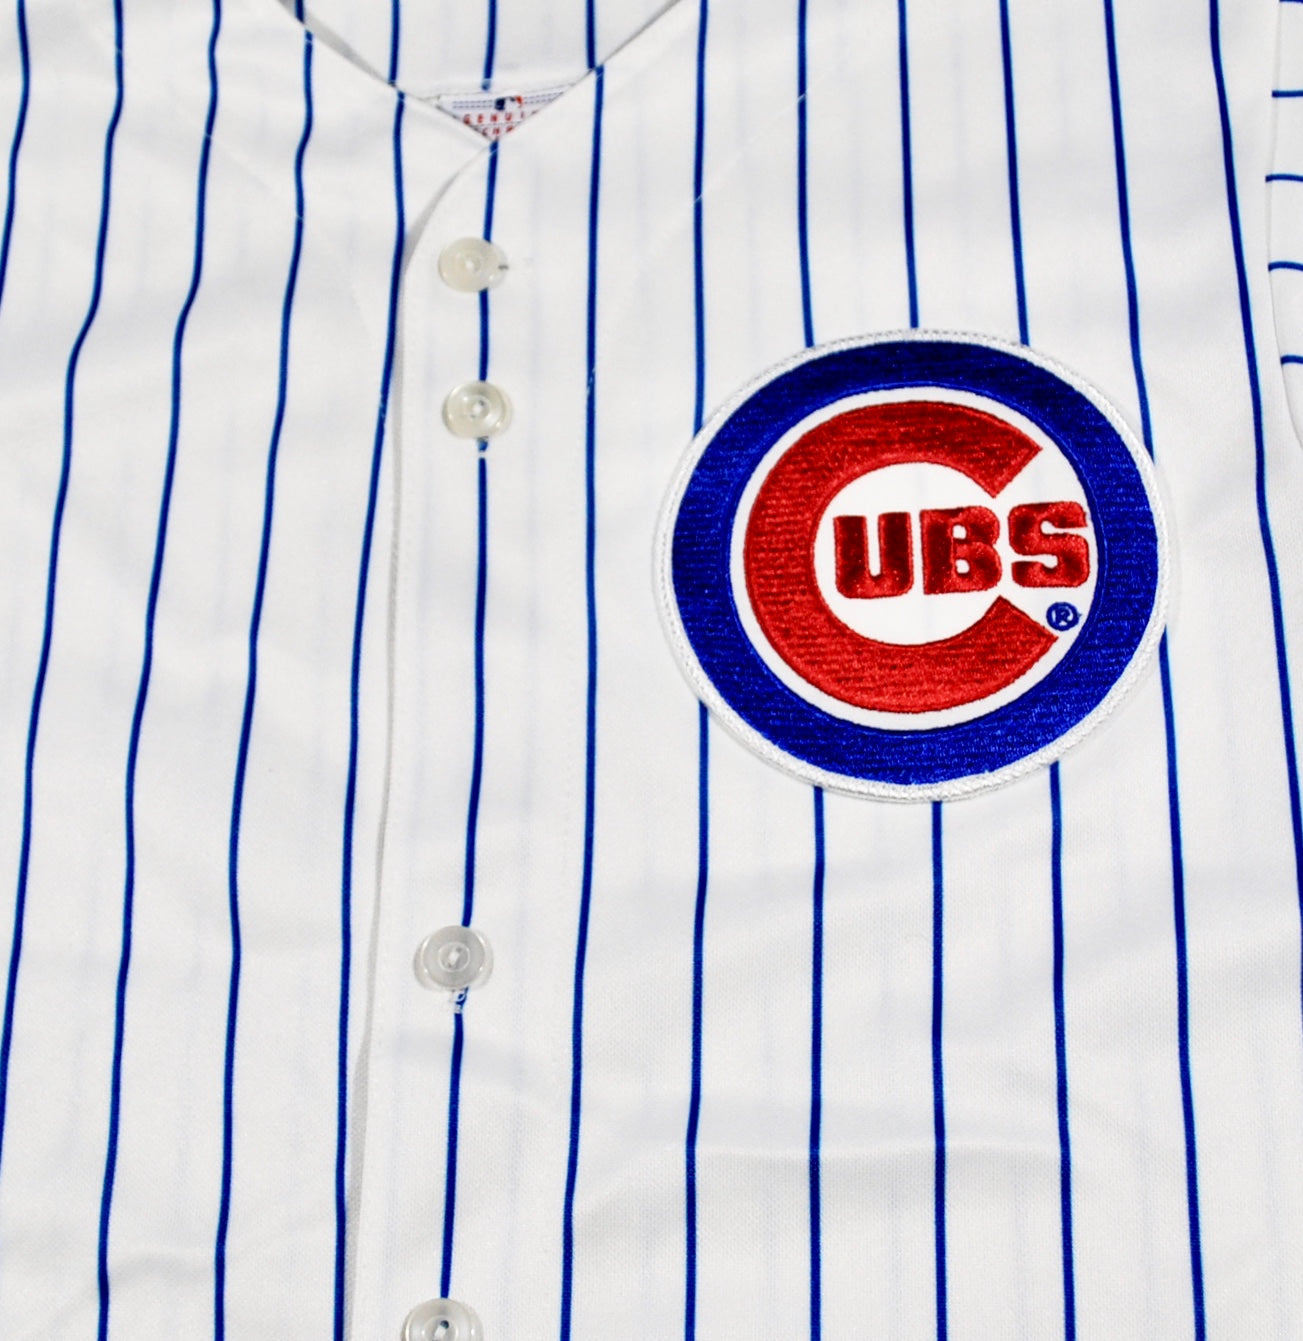 Vintage Chicago Cubs Jersey Size Youth Medium – Yesterday's Attic